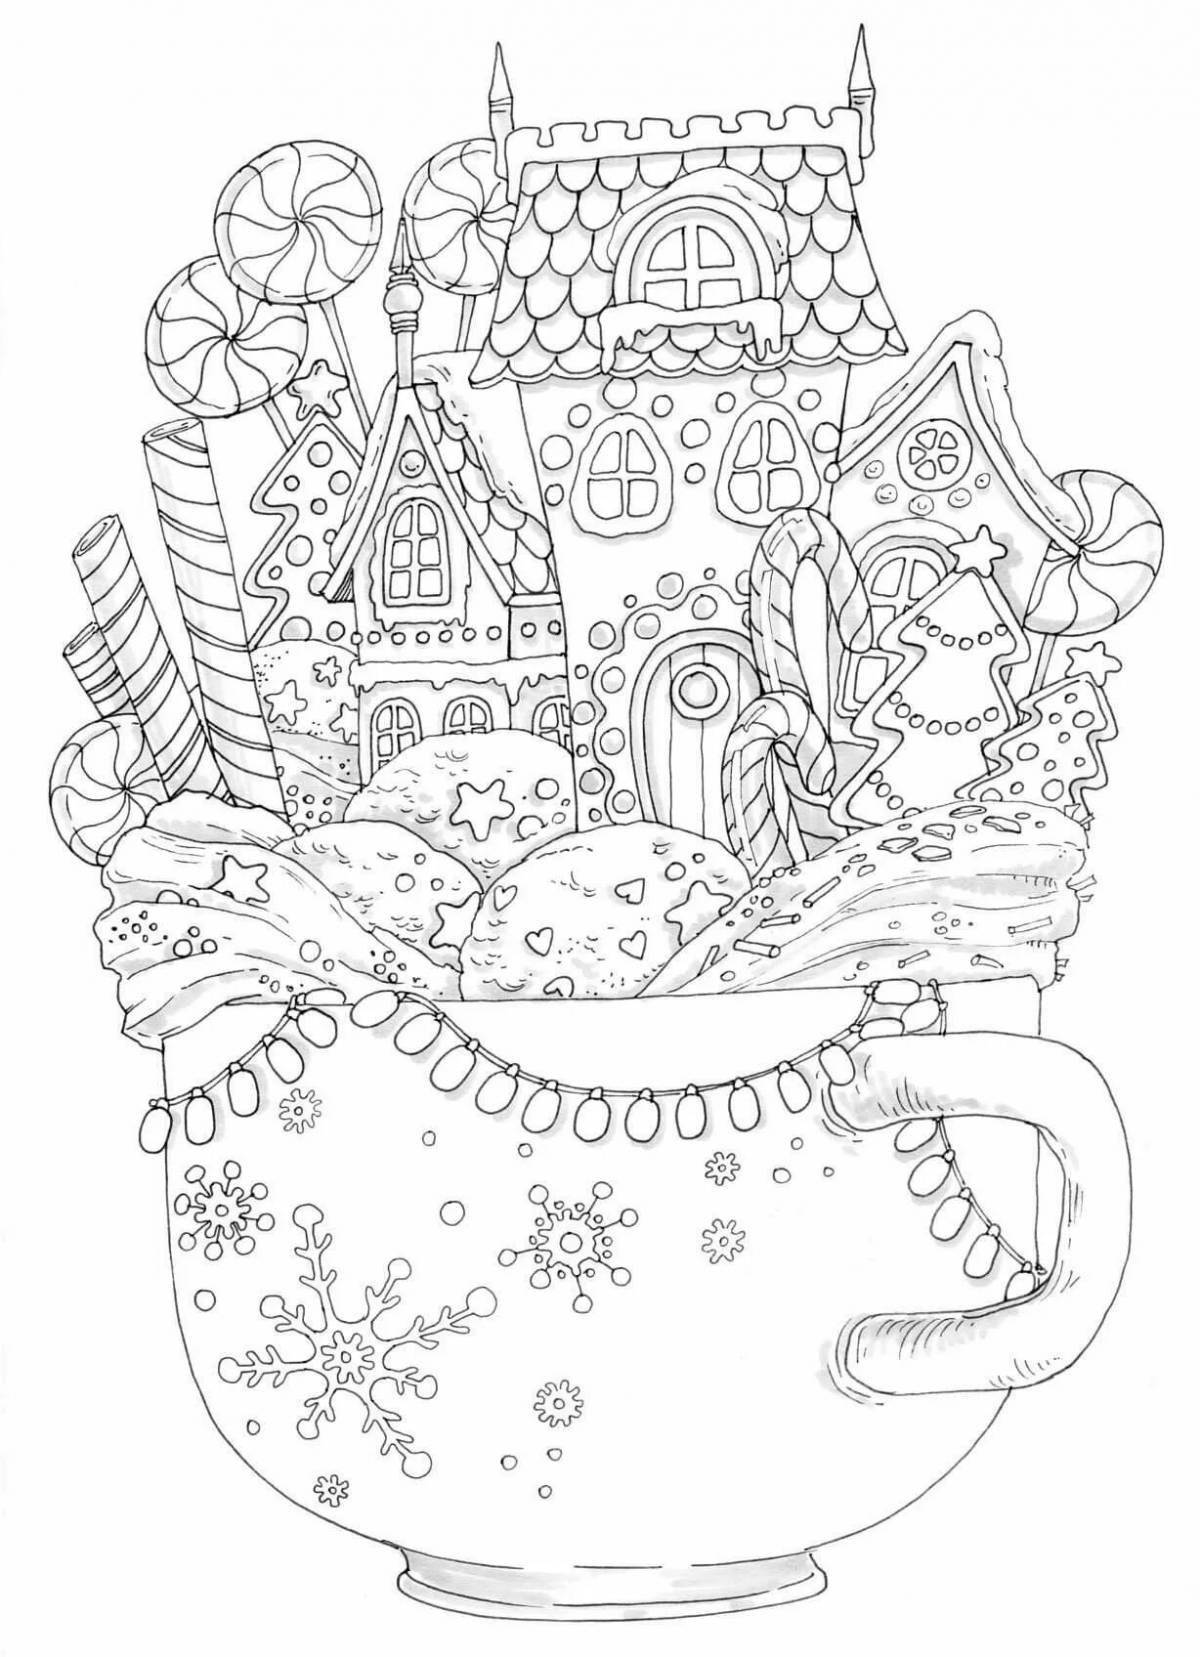 Colorful pinterest coloring book for kids